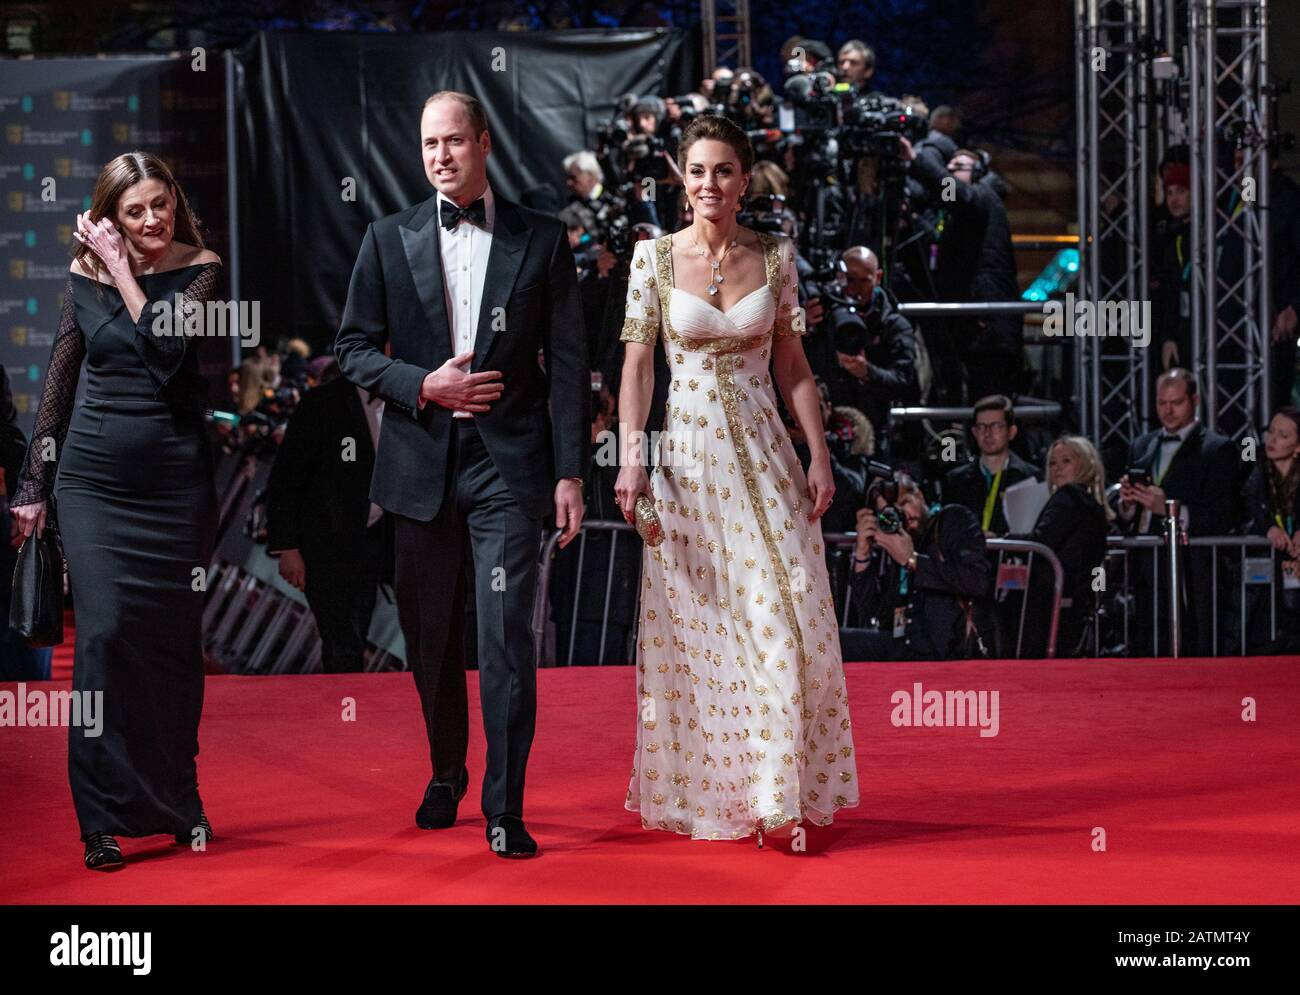 Prince William and Catherine Duchess of Cambridge attend The British Academy Film Awards at the Royal Albert Hall, Kensington, London, UK Stock Photo